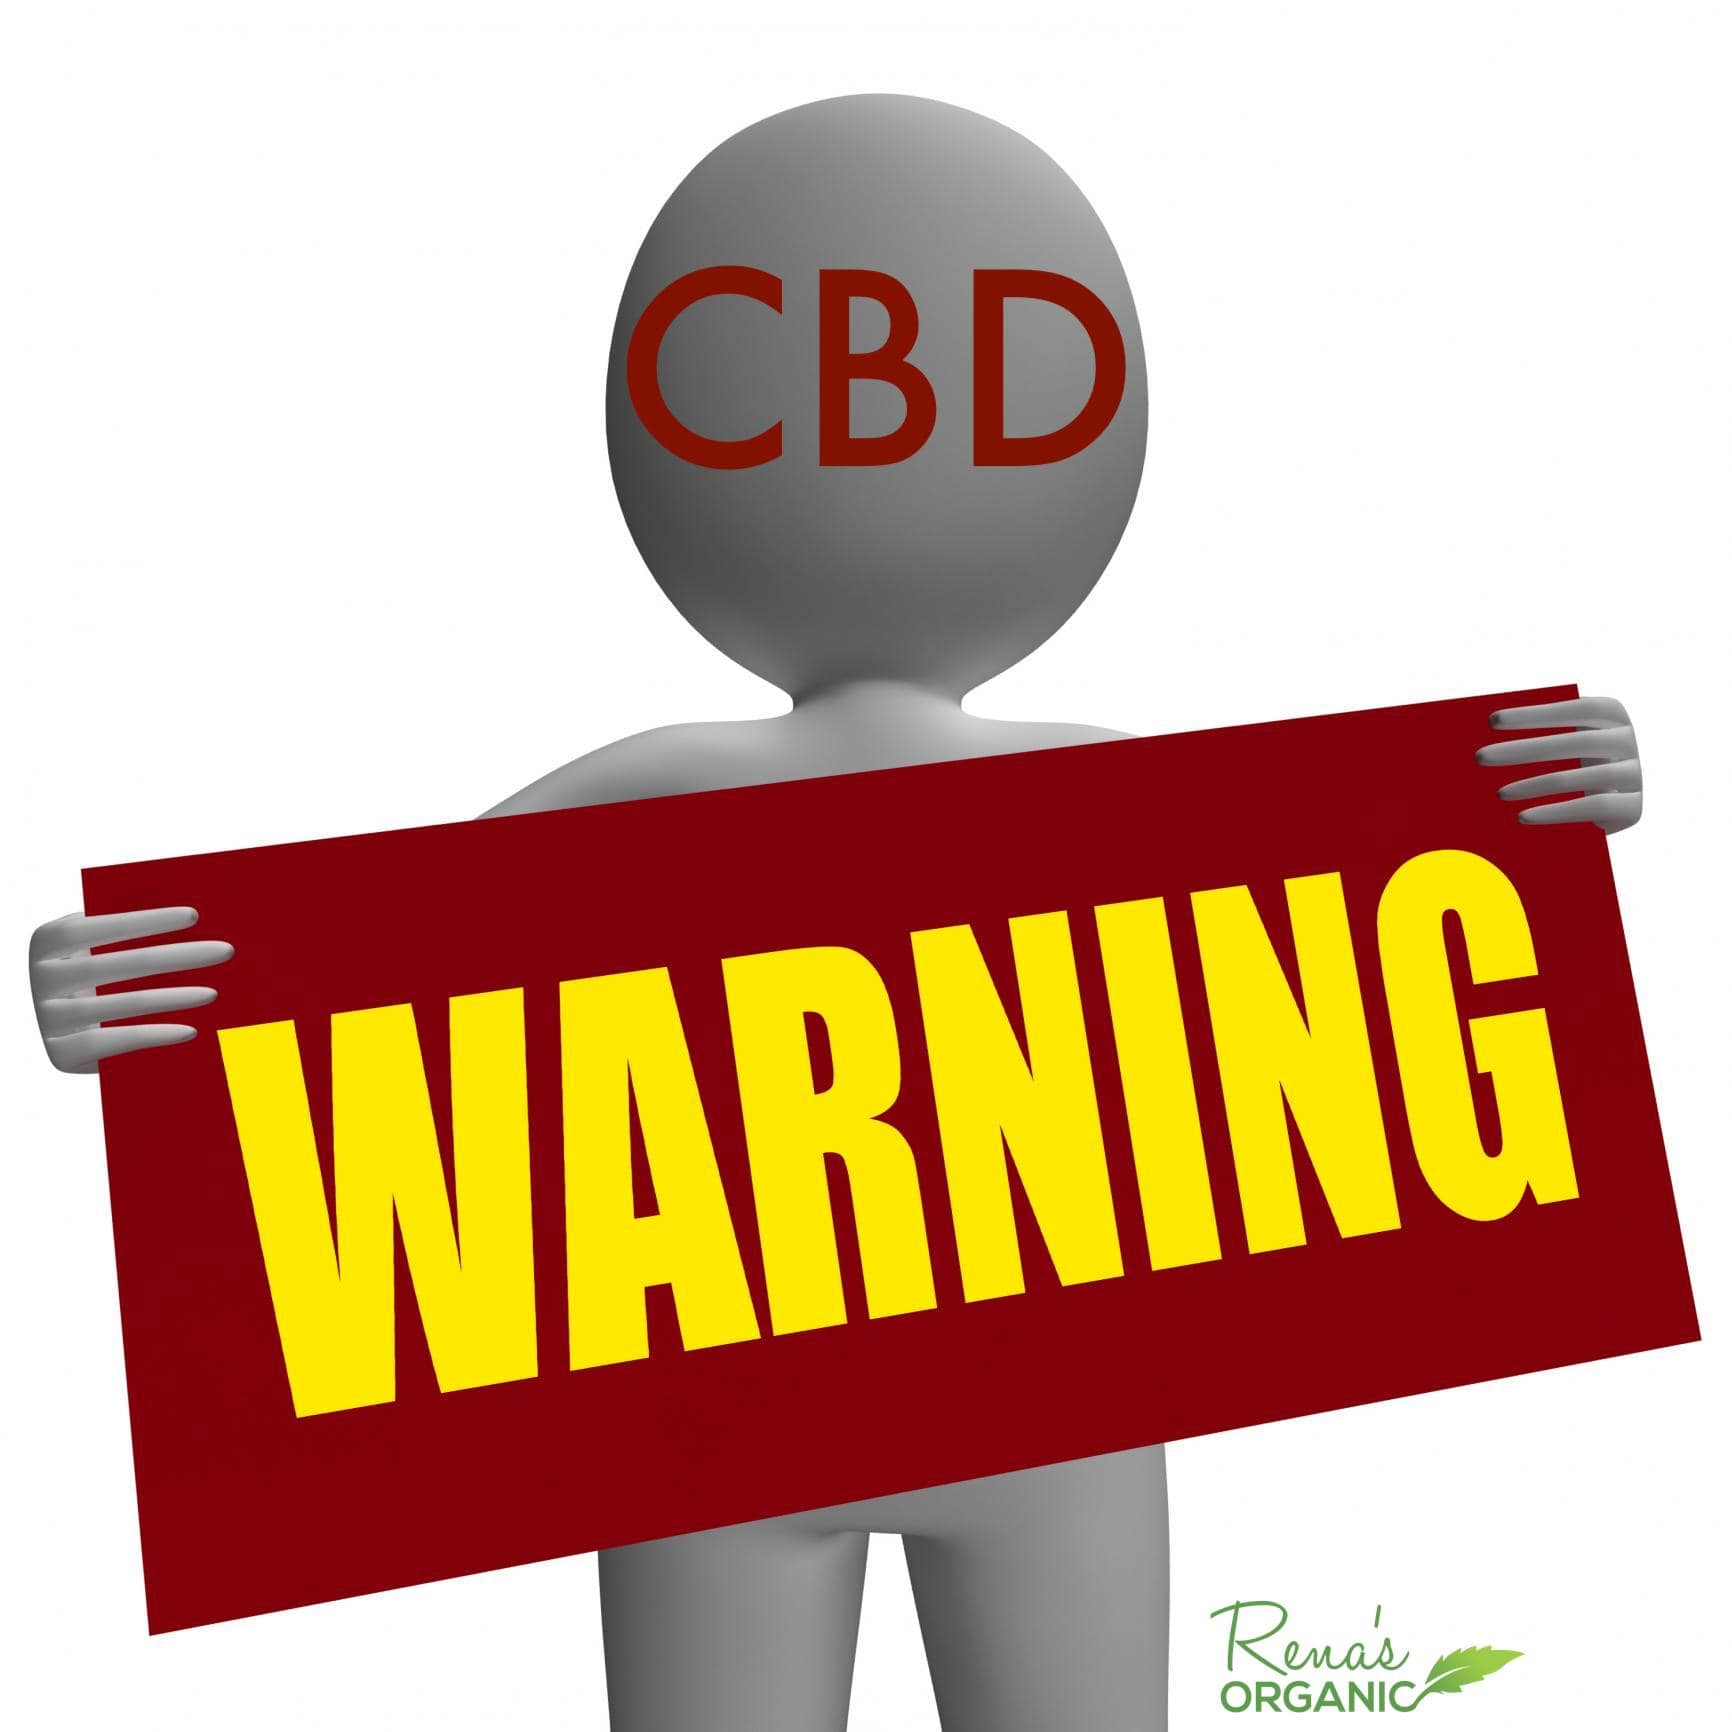 Rena’s Organics offers one of the highest quality cbd creams on the market - cbd pain cream, cbd cream for back pain, cbd pain relief cream, cbd lotion for pain and more